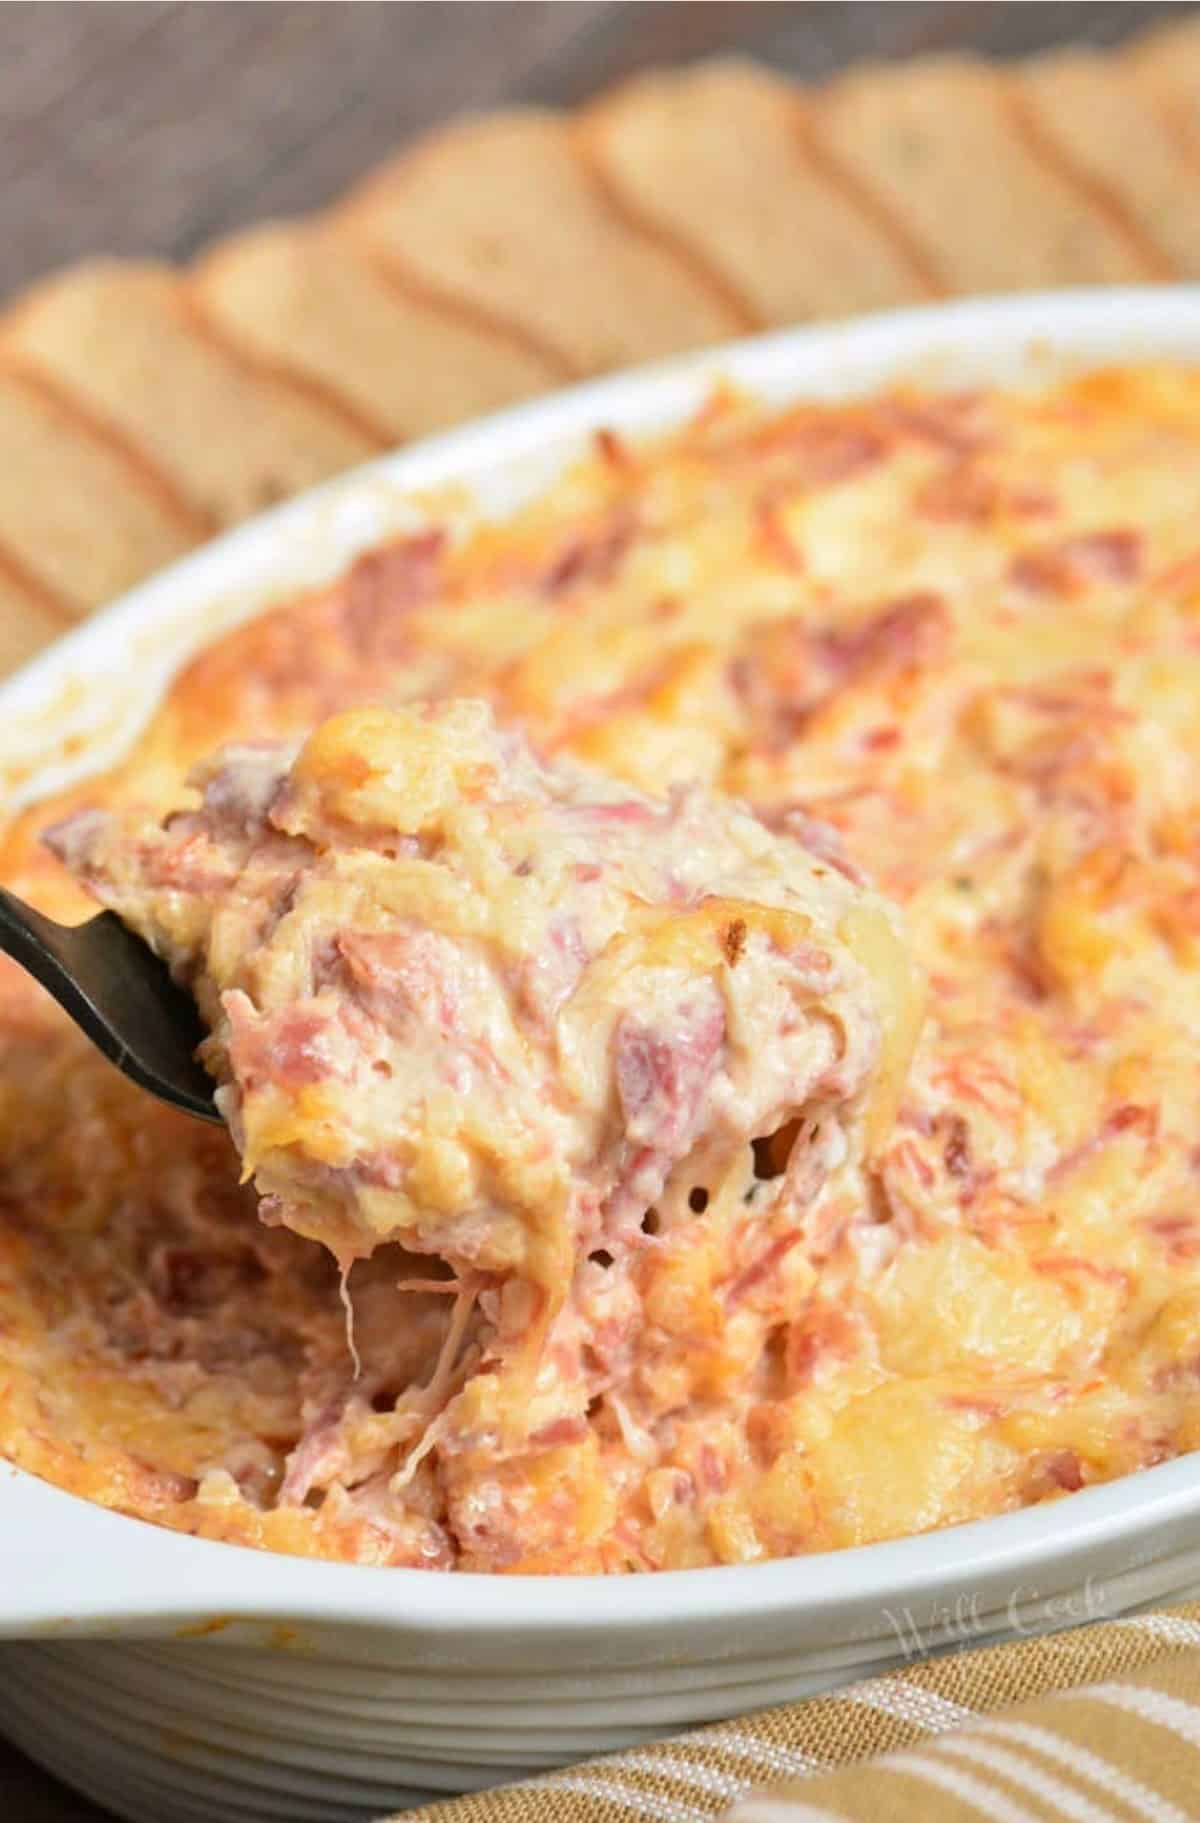 Scooping up some of the Reuben dip with a fork out of the baking dish.